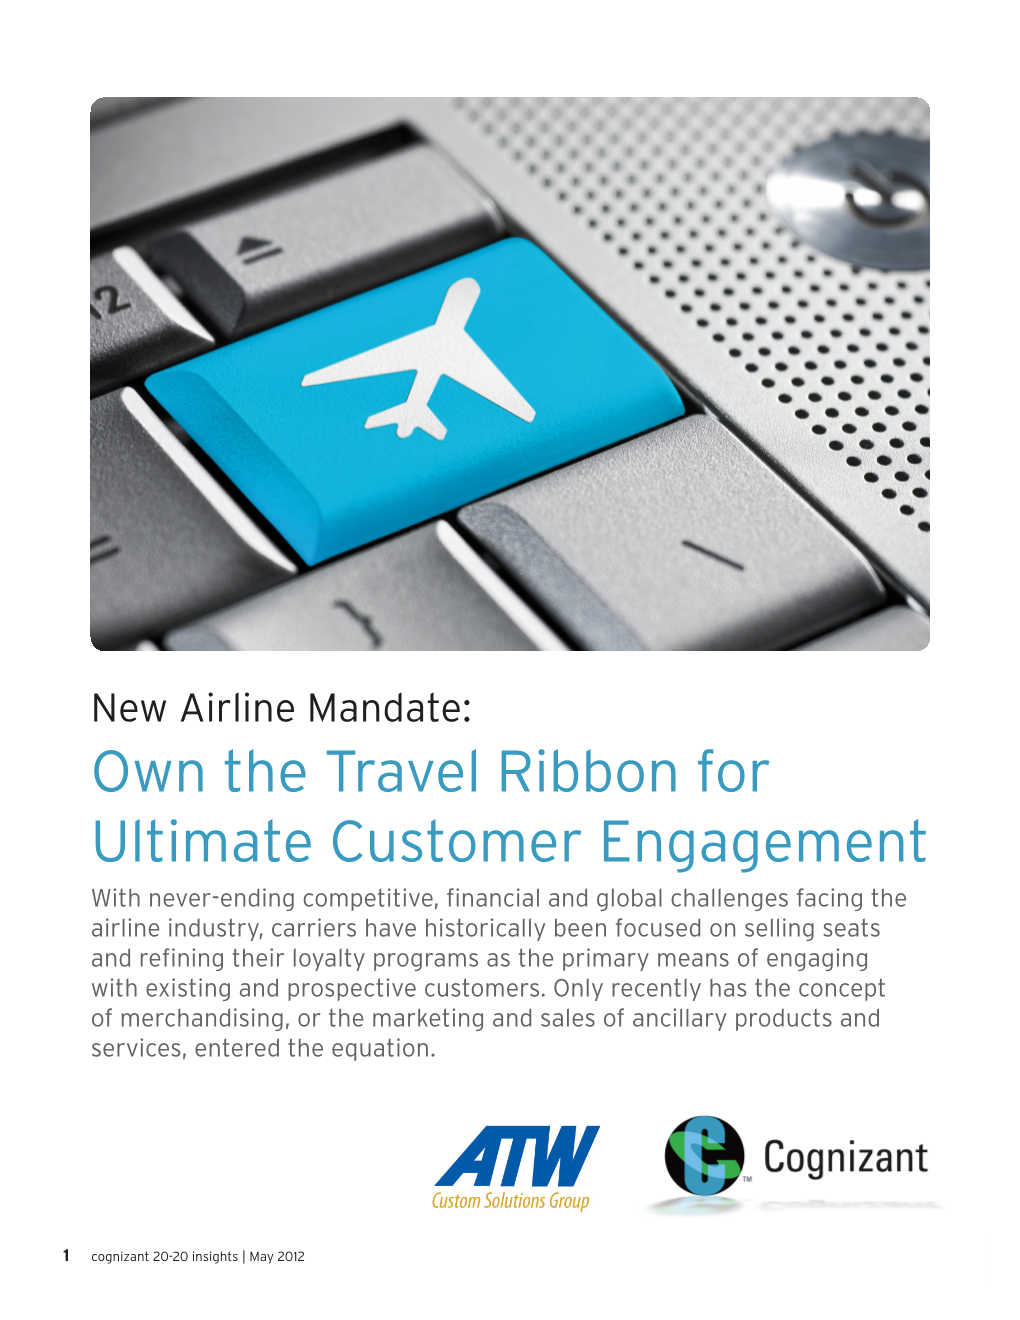 Own the Travel Ribbon for Ultimate Customer Engagement